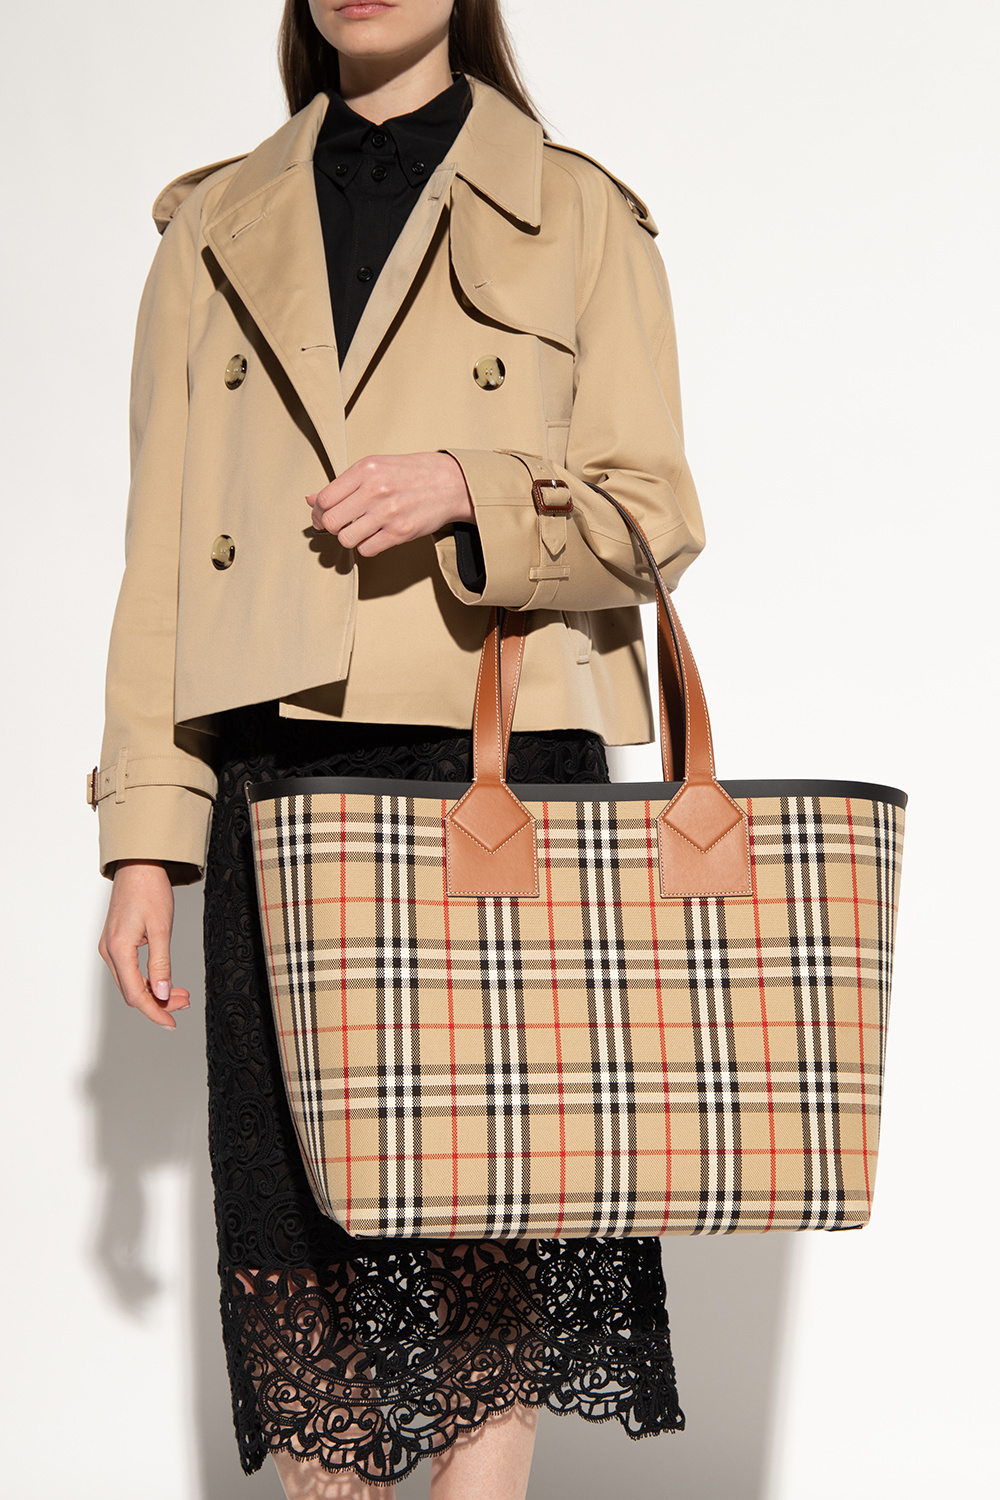 Large London Tote in Briar Brown/black | Burberry® Official